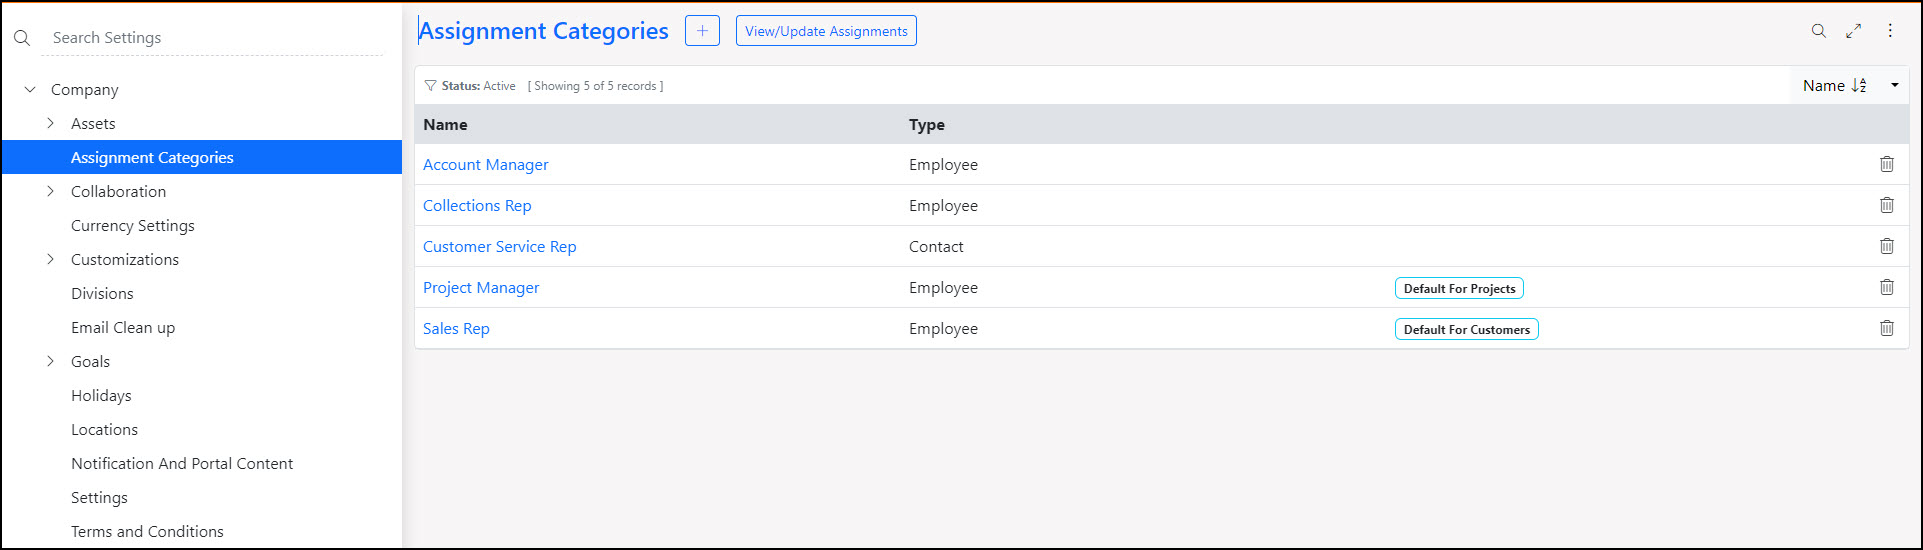 List view of the Assignment Categories within Company Settings in Striven